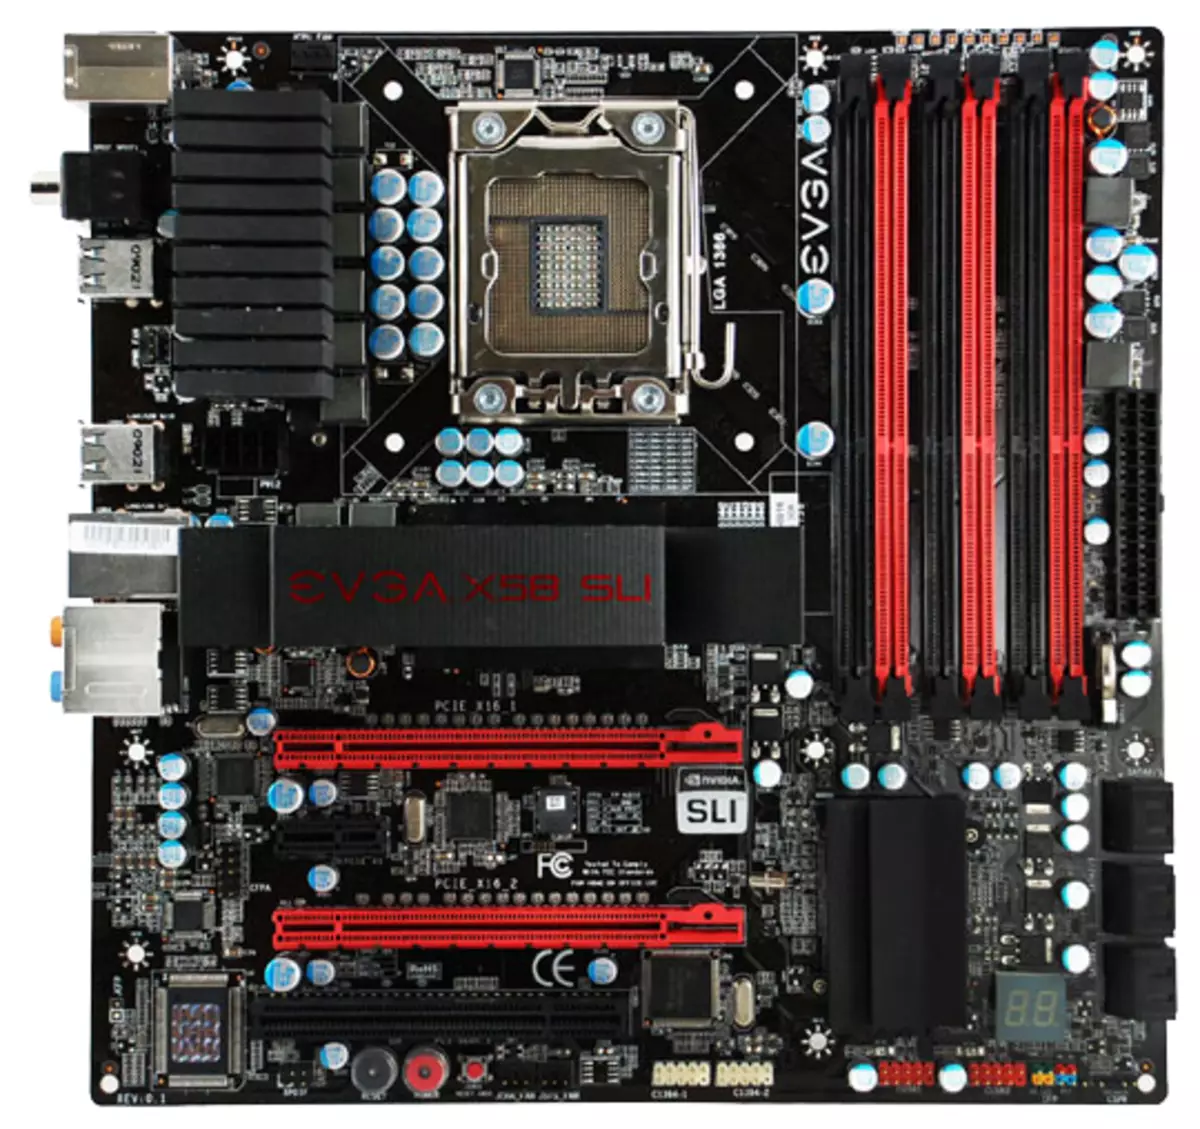 Choosing a new motherboard for a computer